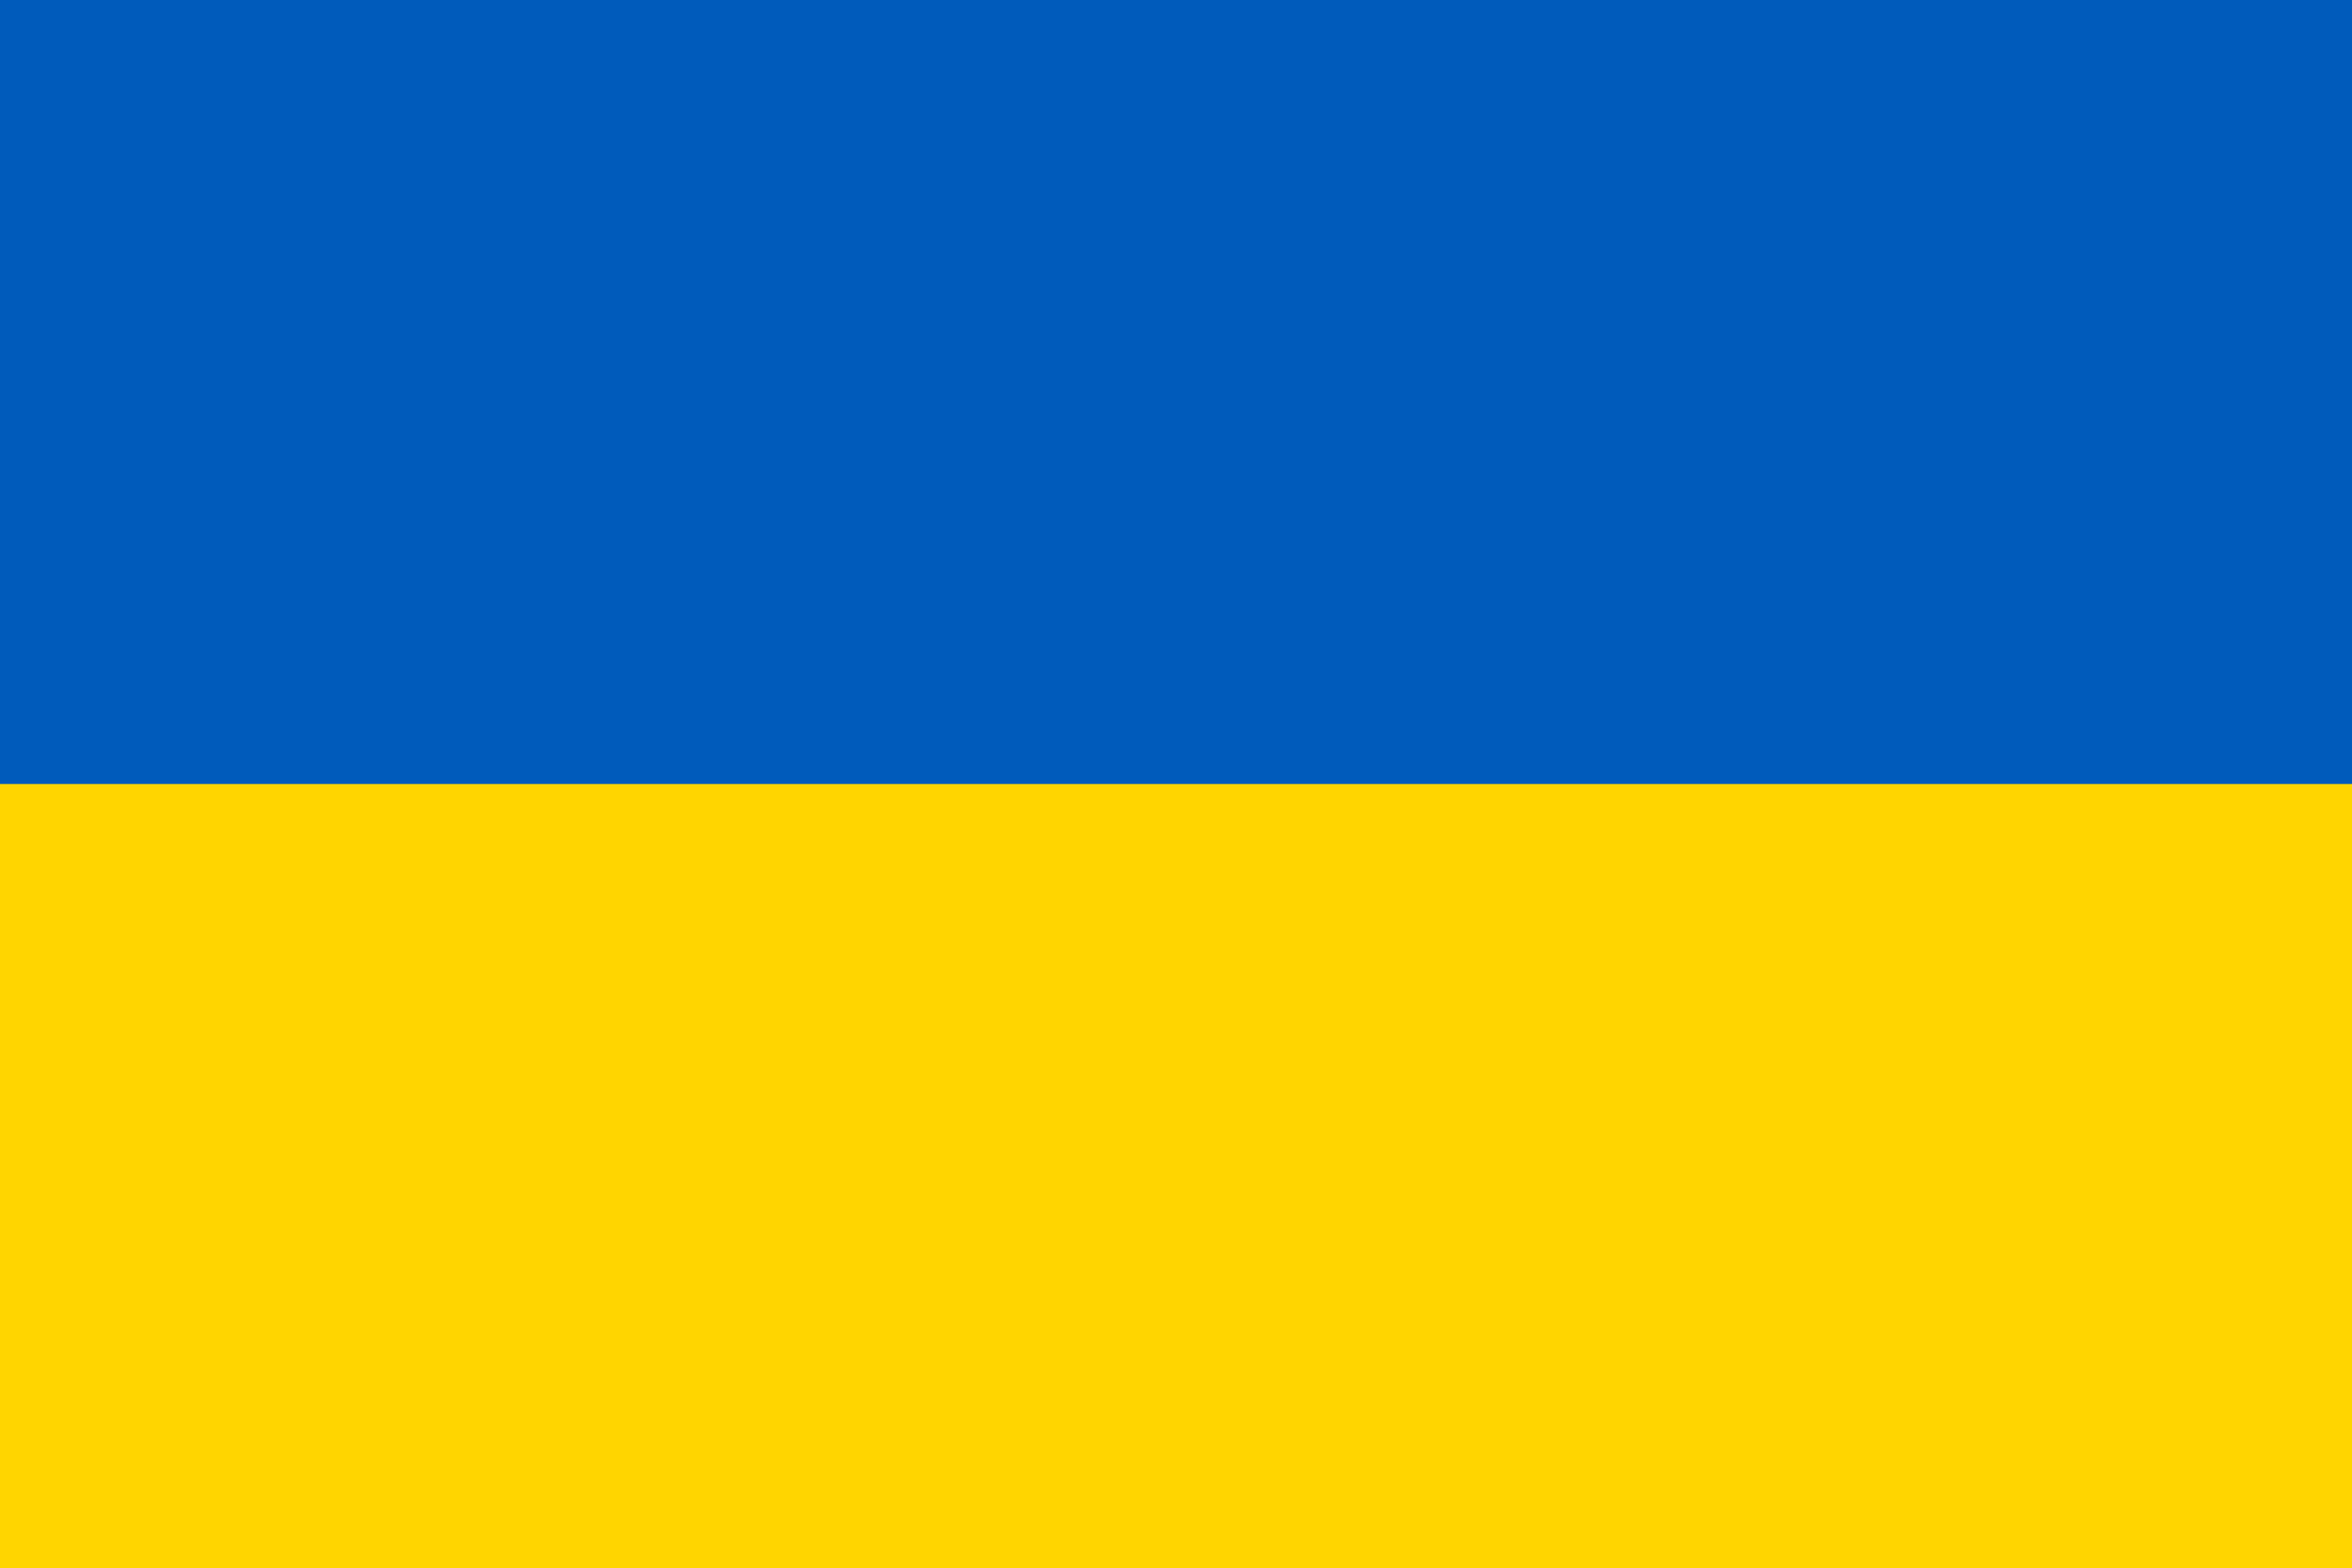 For our Friends in Ukraine